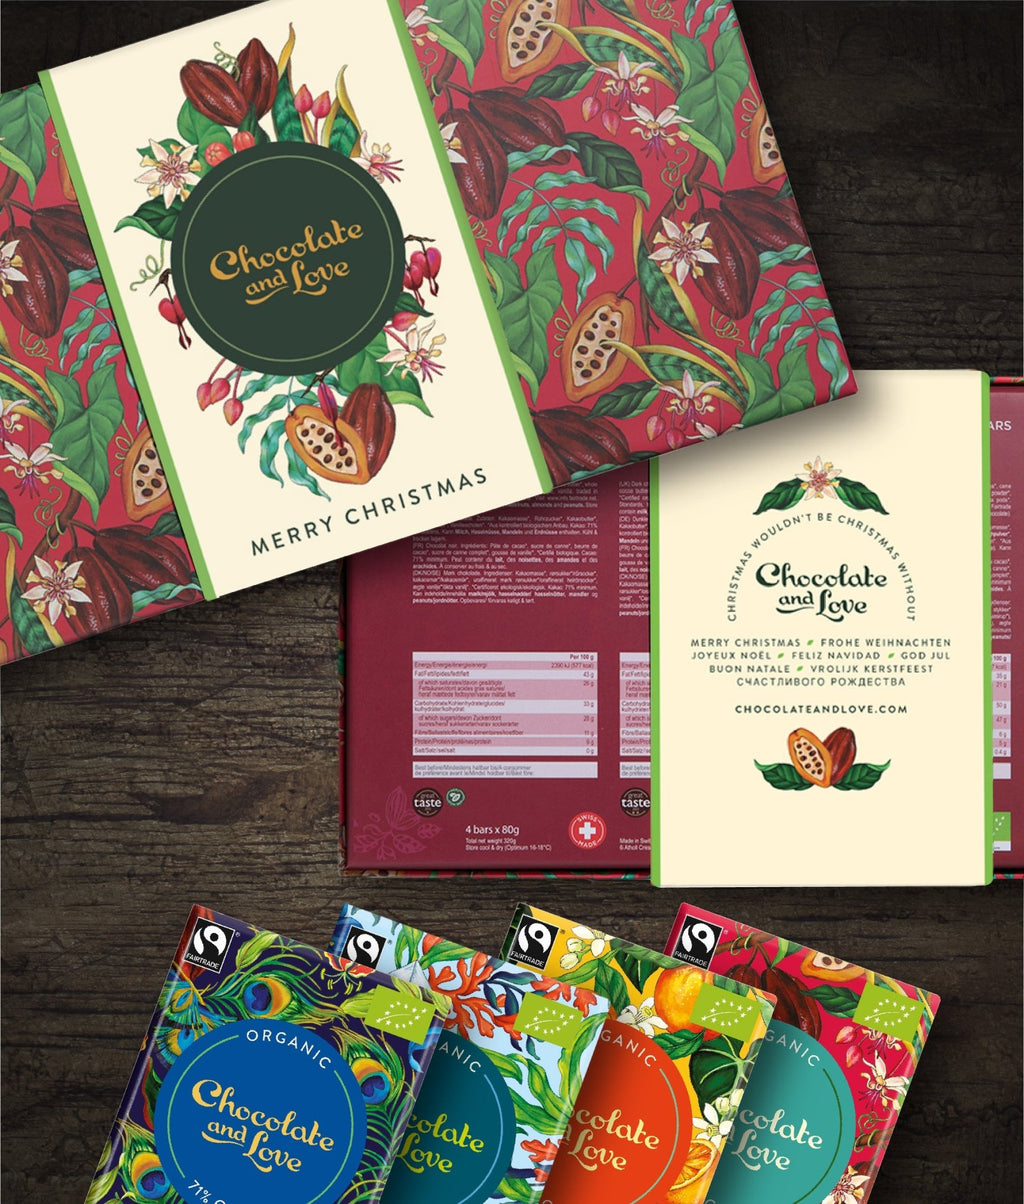 Pass on all good tidings and joy in one luxuriously designed Christmas gift box!